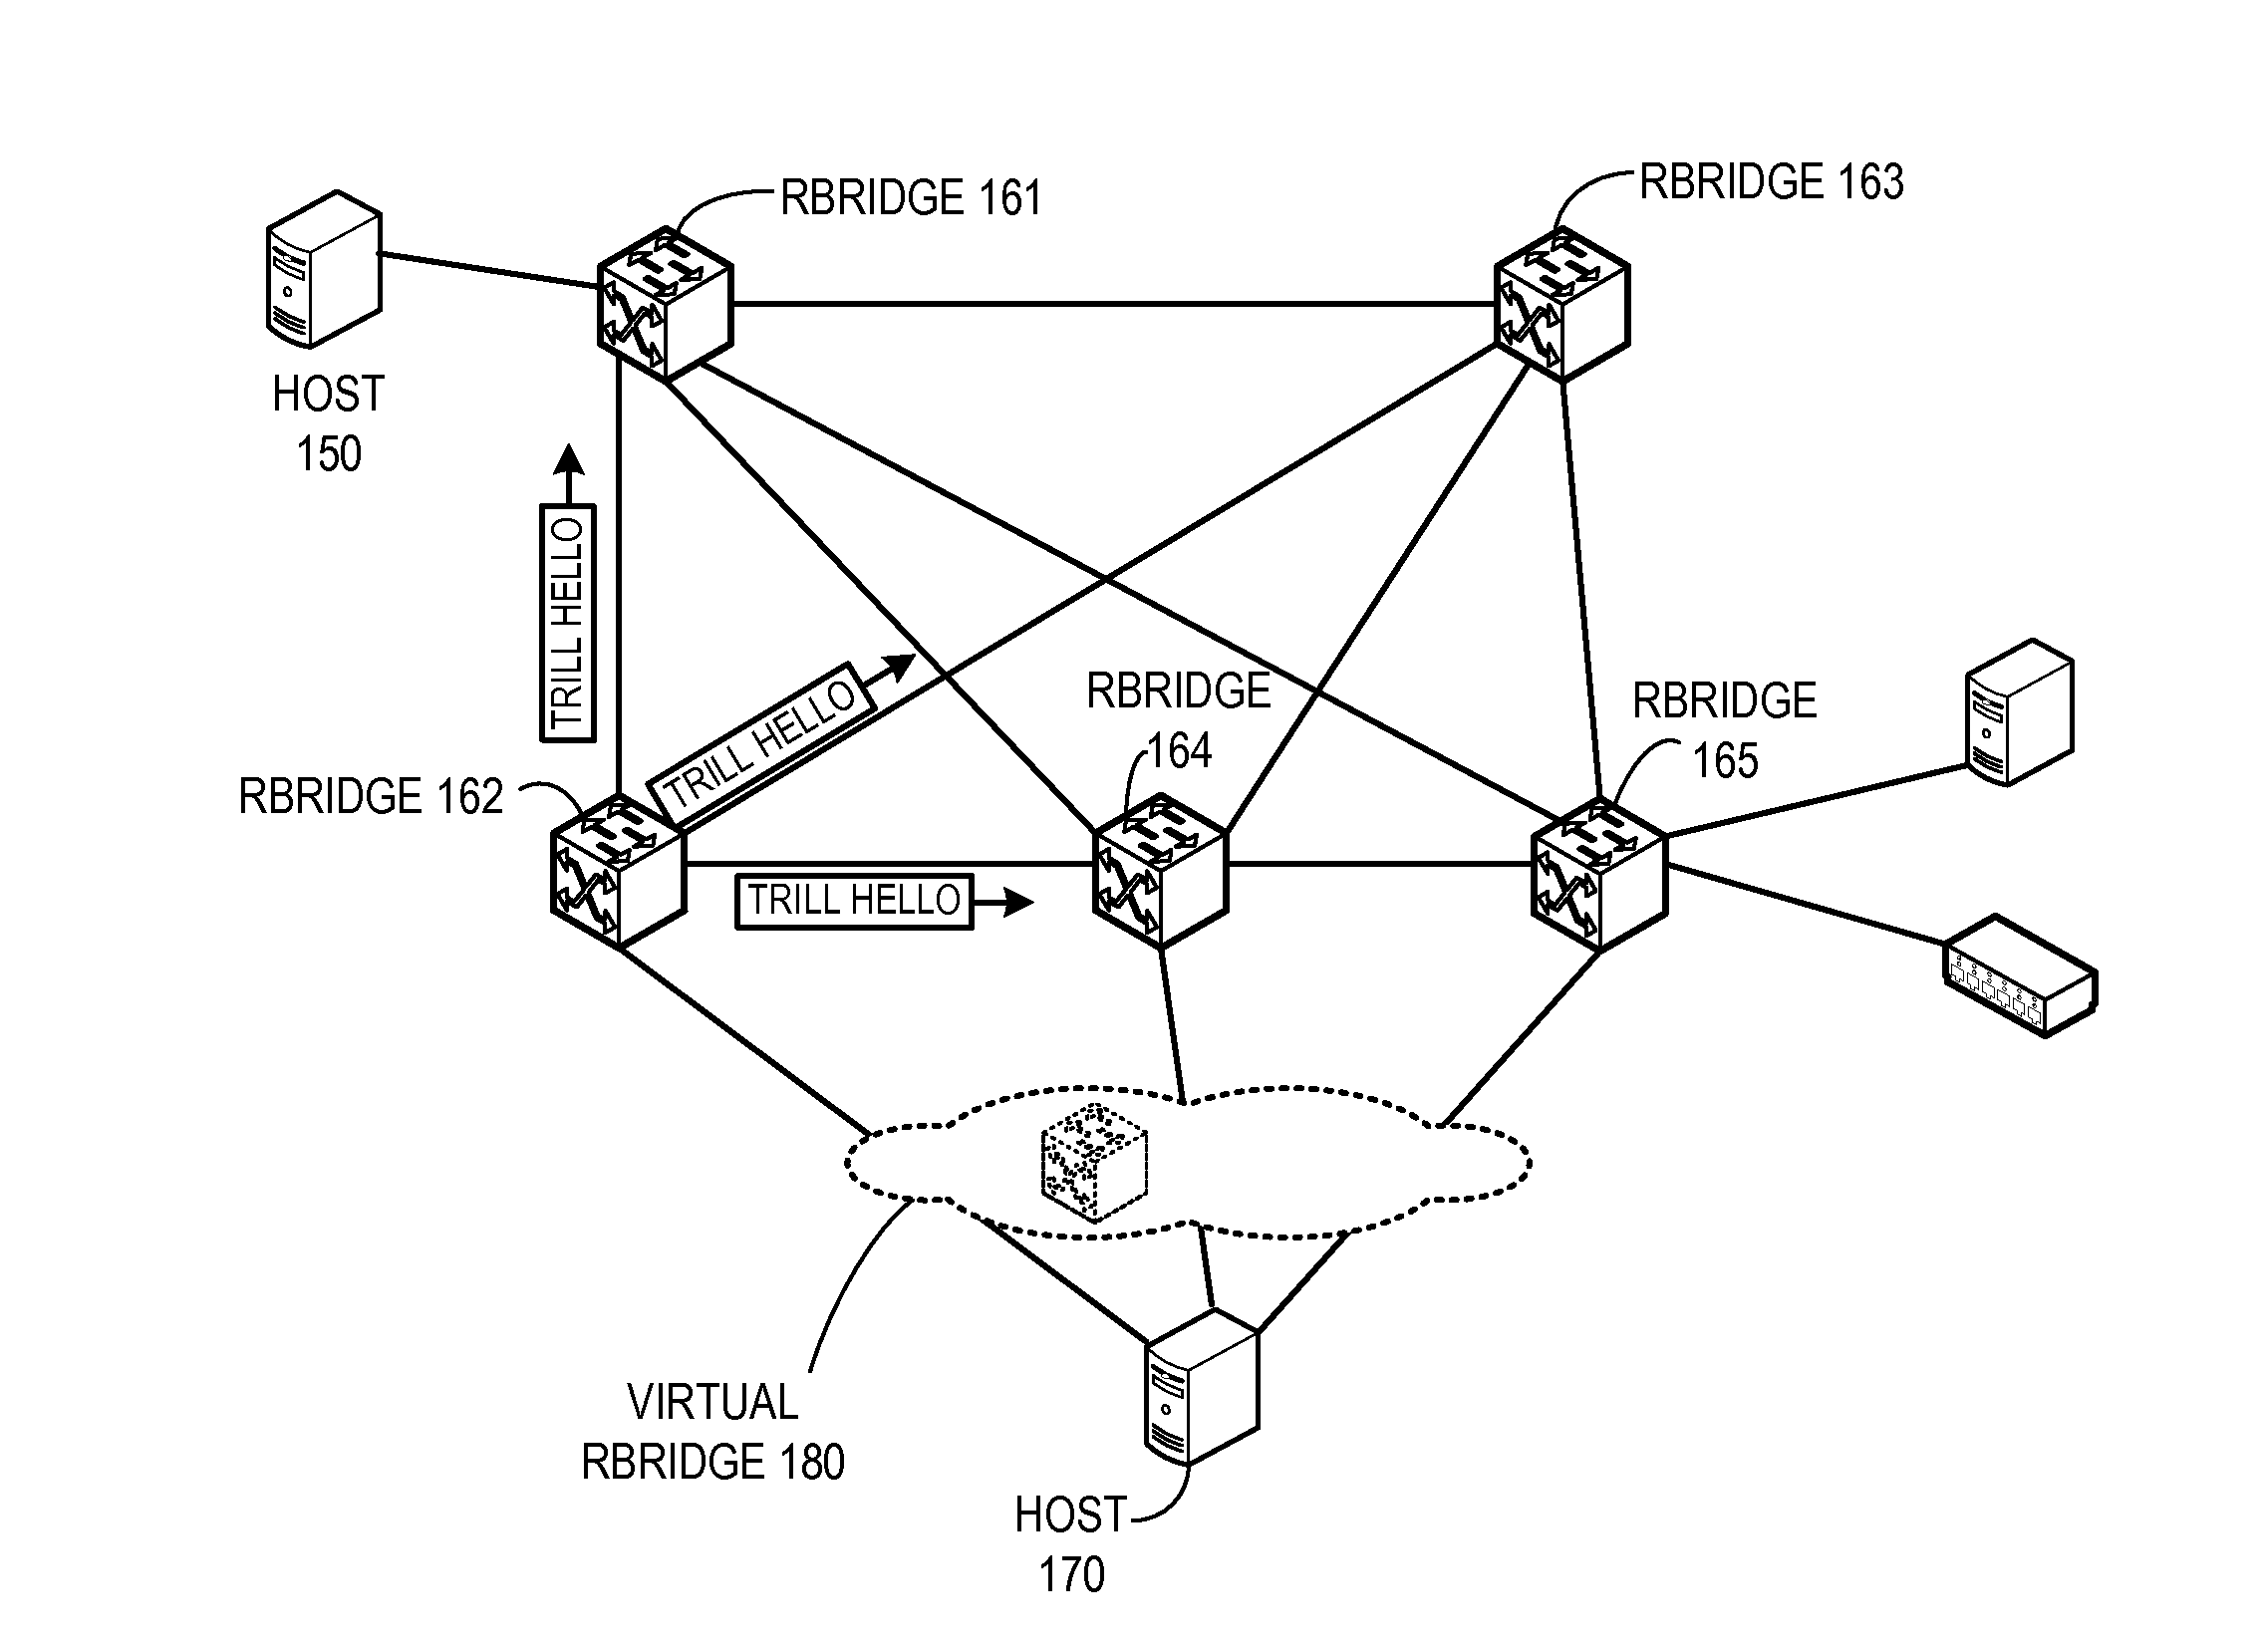 Method and system for remote load balancing in high-availability networks